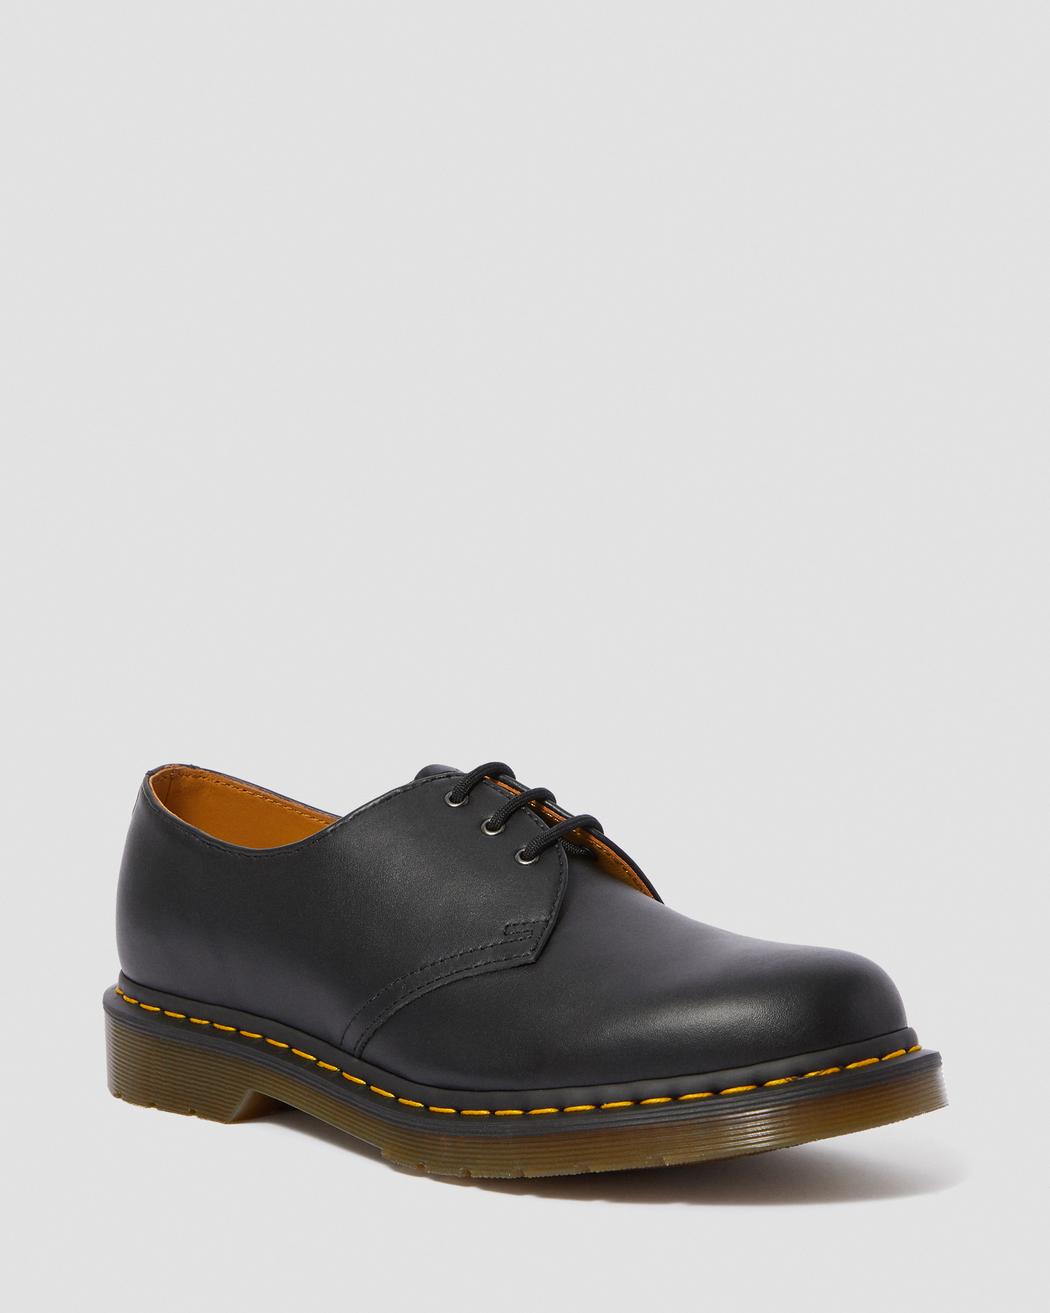 1461 Nappa Leather Oxford Shoes | Dr. Martens